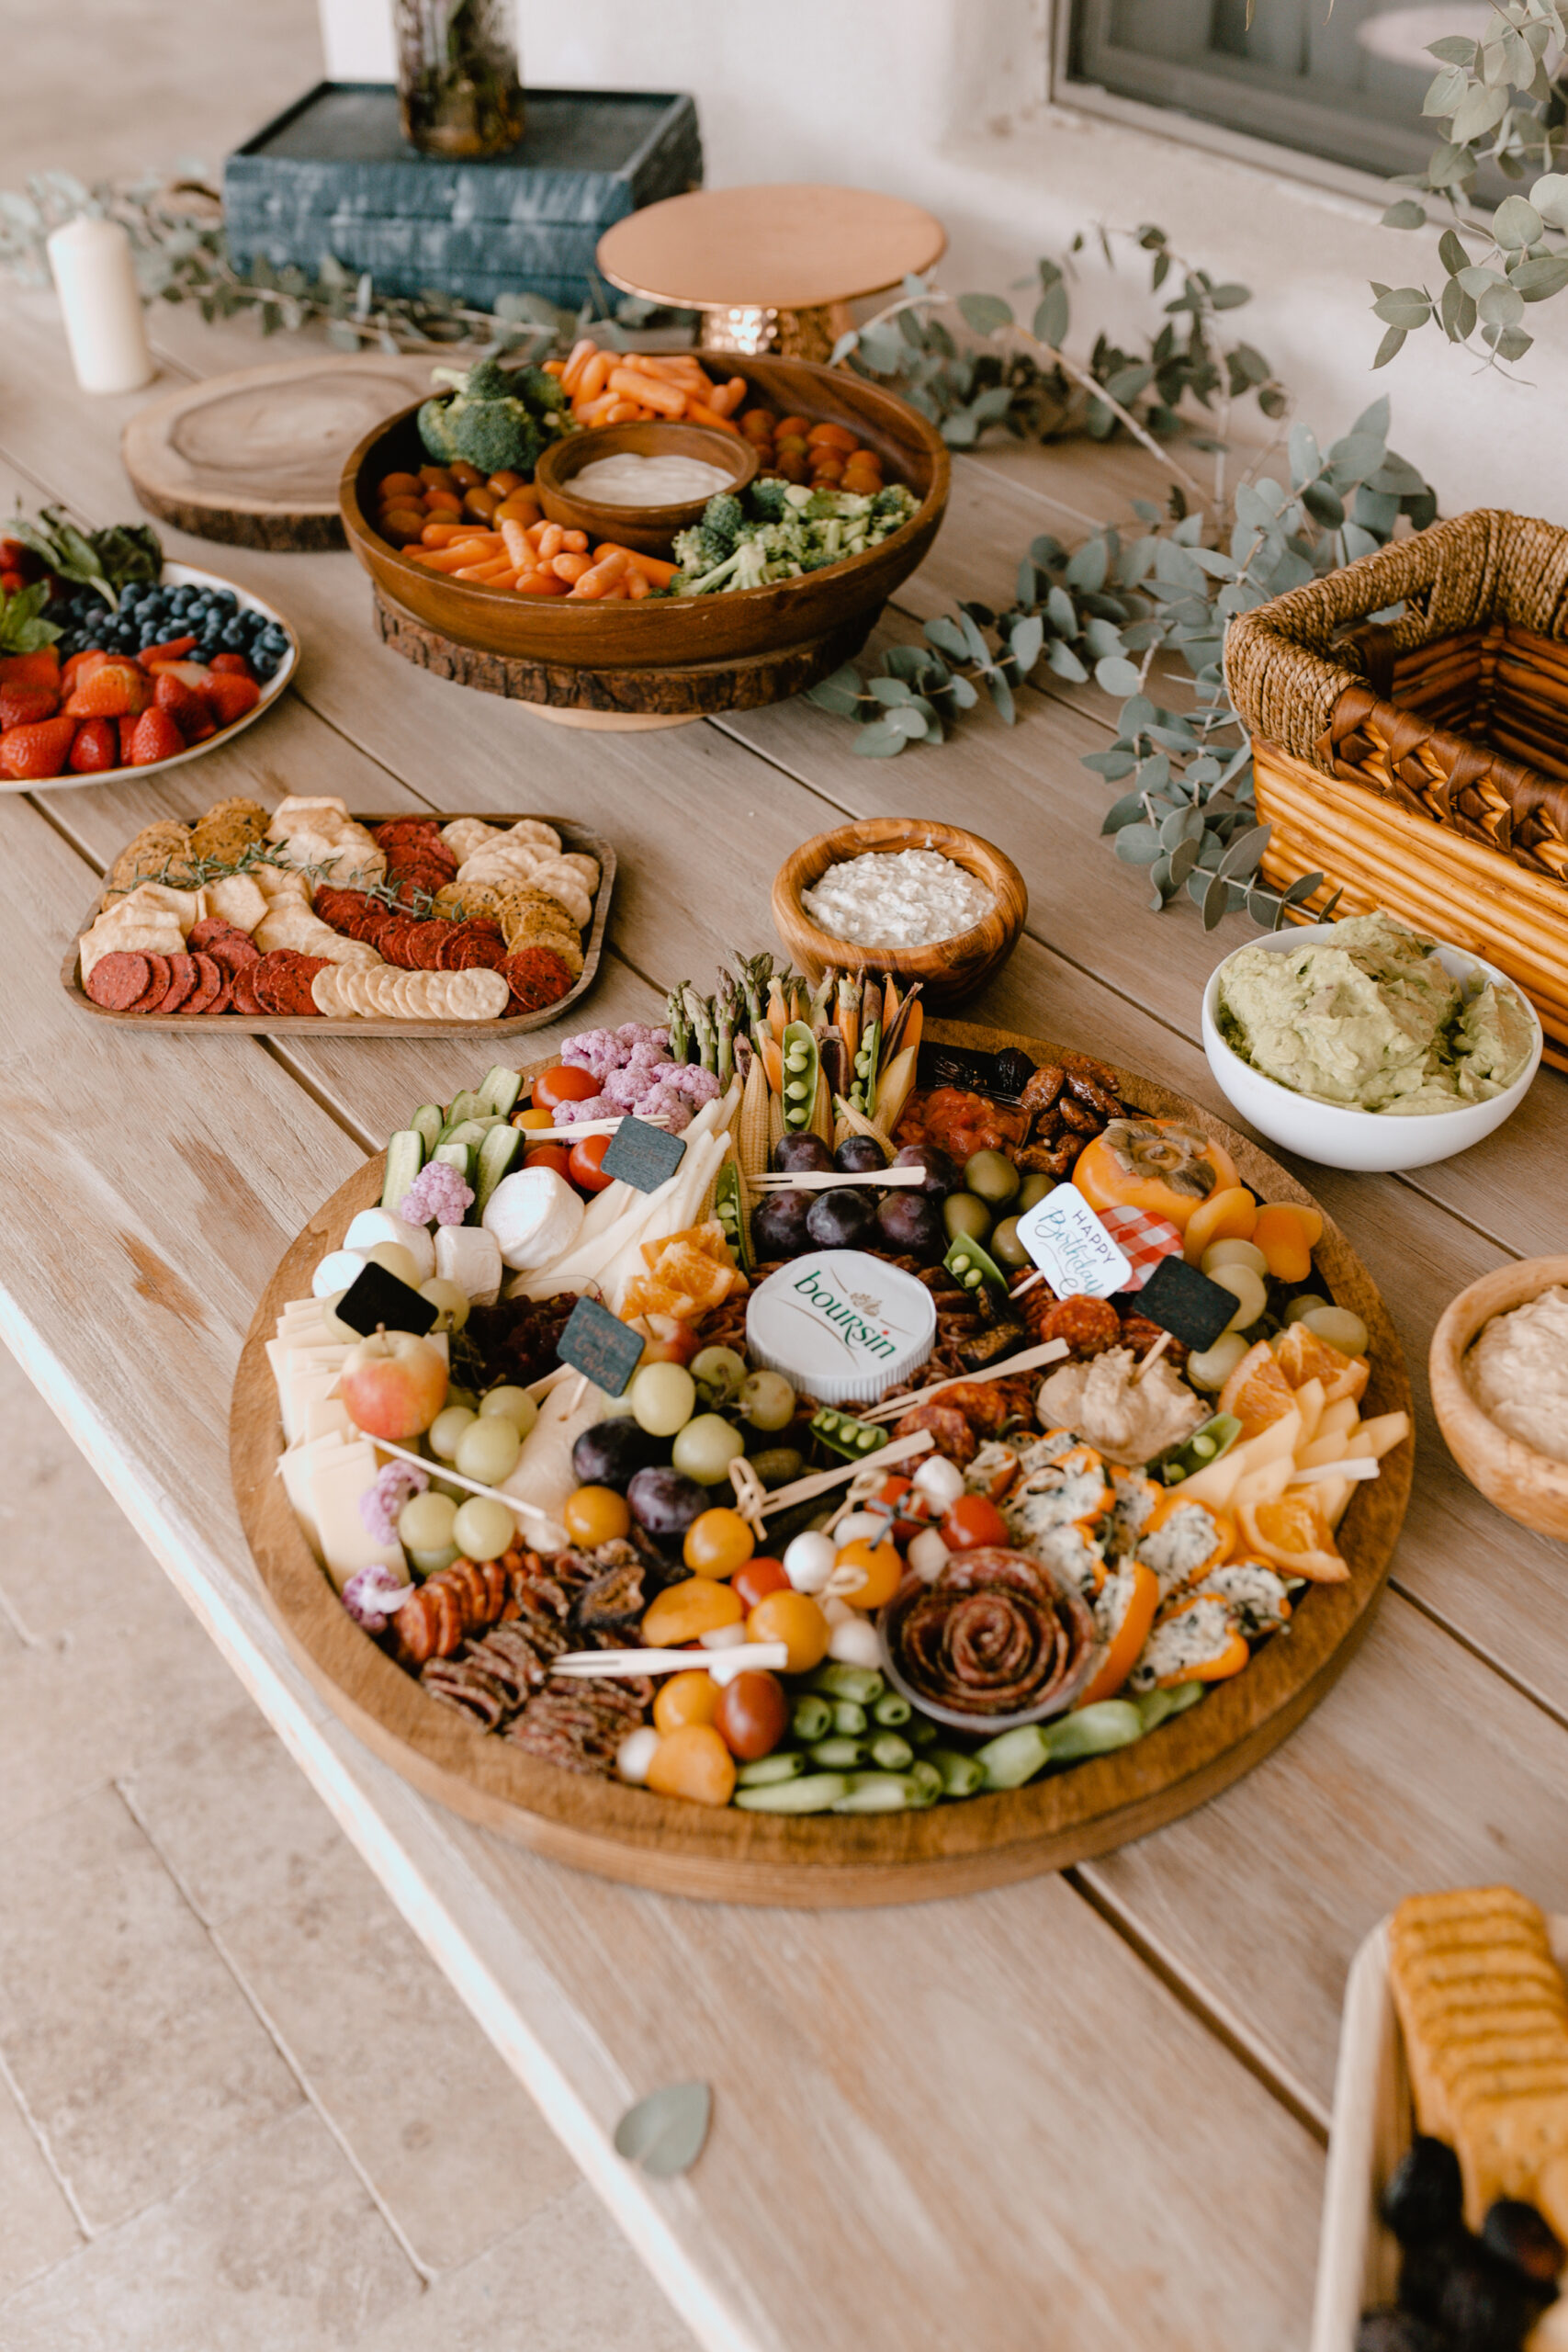 the food and appetizer table for this whiskey + cigar themed birthday party! #charcuterieboard #partyideas #milestonebirthdayparty